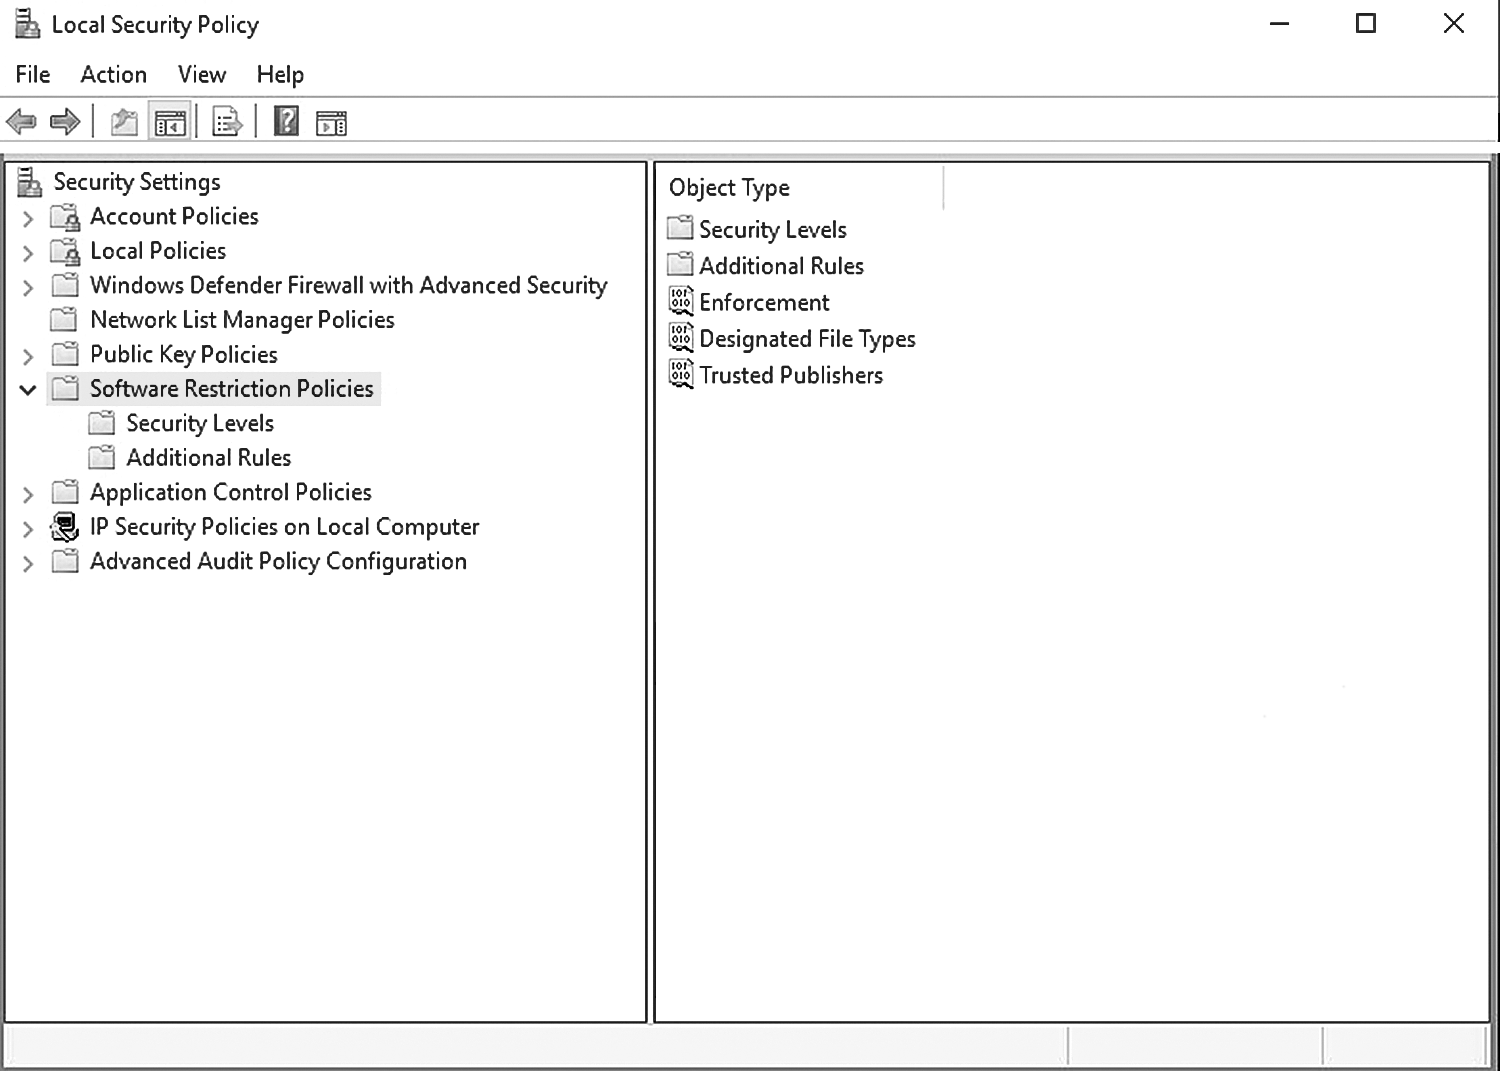 A screenshot with categories of software restriction policies.